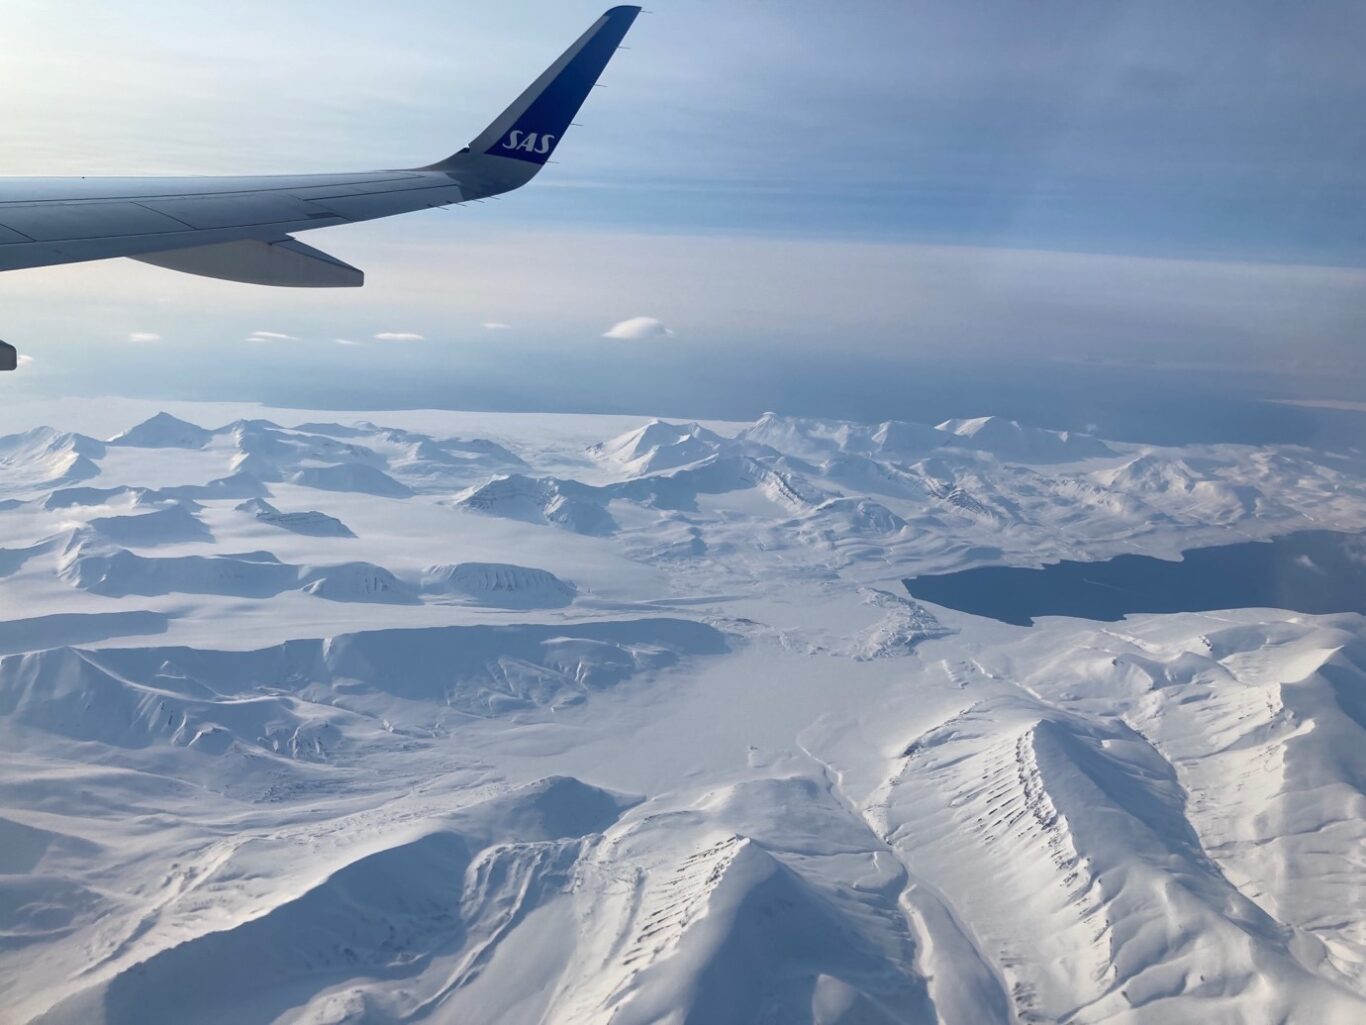 The vast Arctic landscape of Svalbard attracts people from all over the world to visit and live in Longyearbyen. Most arrive by plane. Photo by Alexandra Meyer.